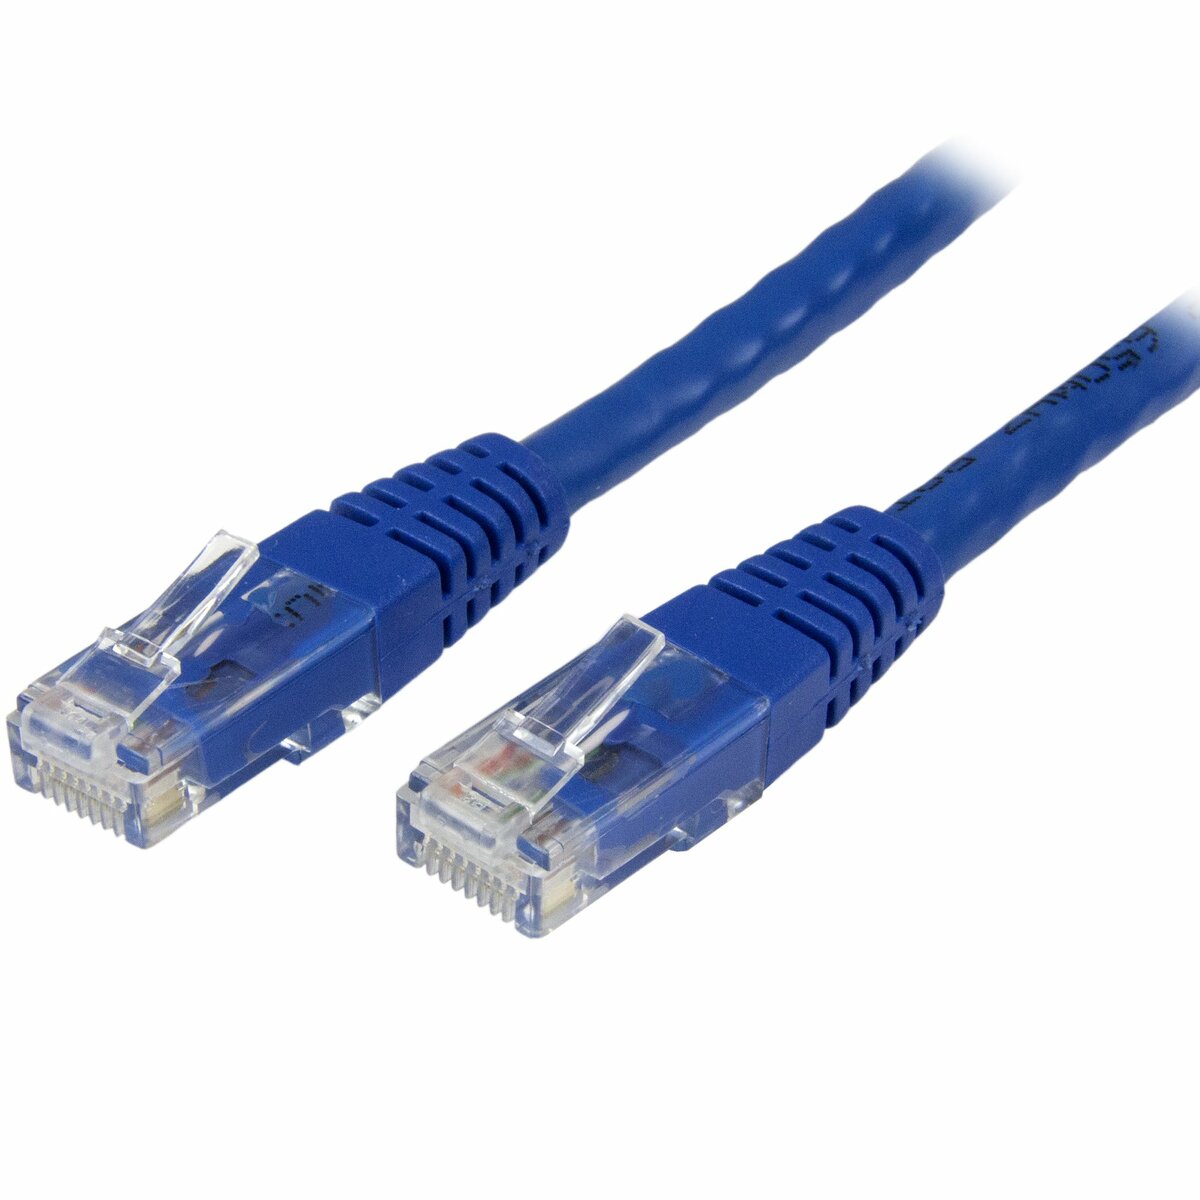 StarTech.com 15ft CAT6 Ethernet Cable - 10 Gigabit Snagless RJ45 650MHz  100W PoE Patch Cord - CAT 6 10GbE UTP Network Cable w/Strain Relief - Black  - Fluke Tested/Wiring is UL Certified/TIA 